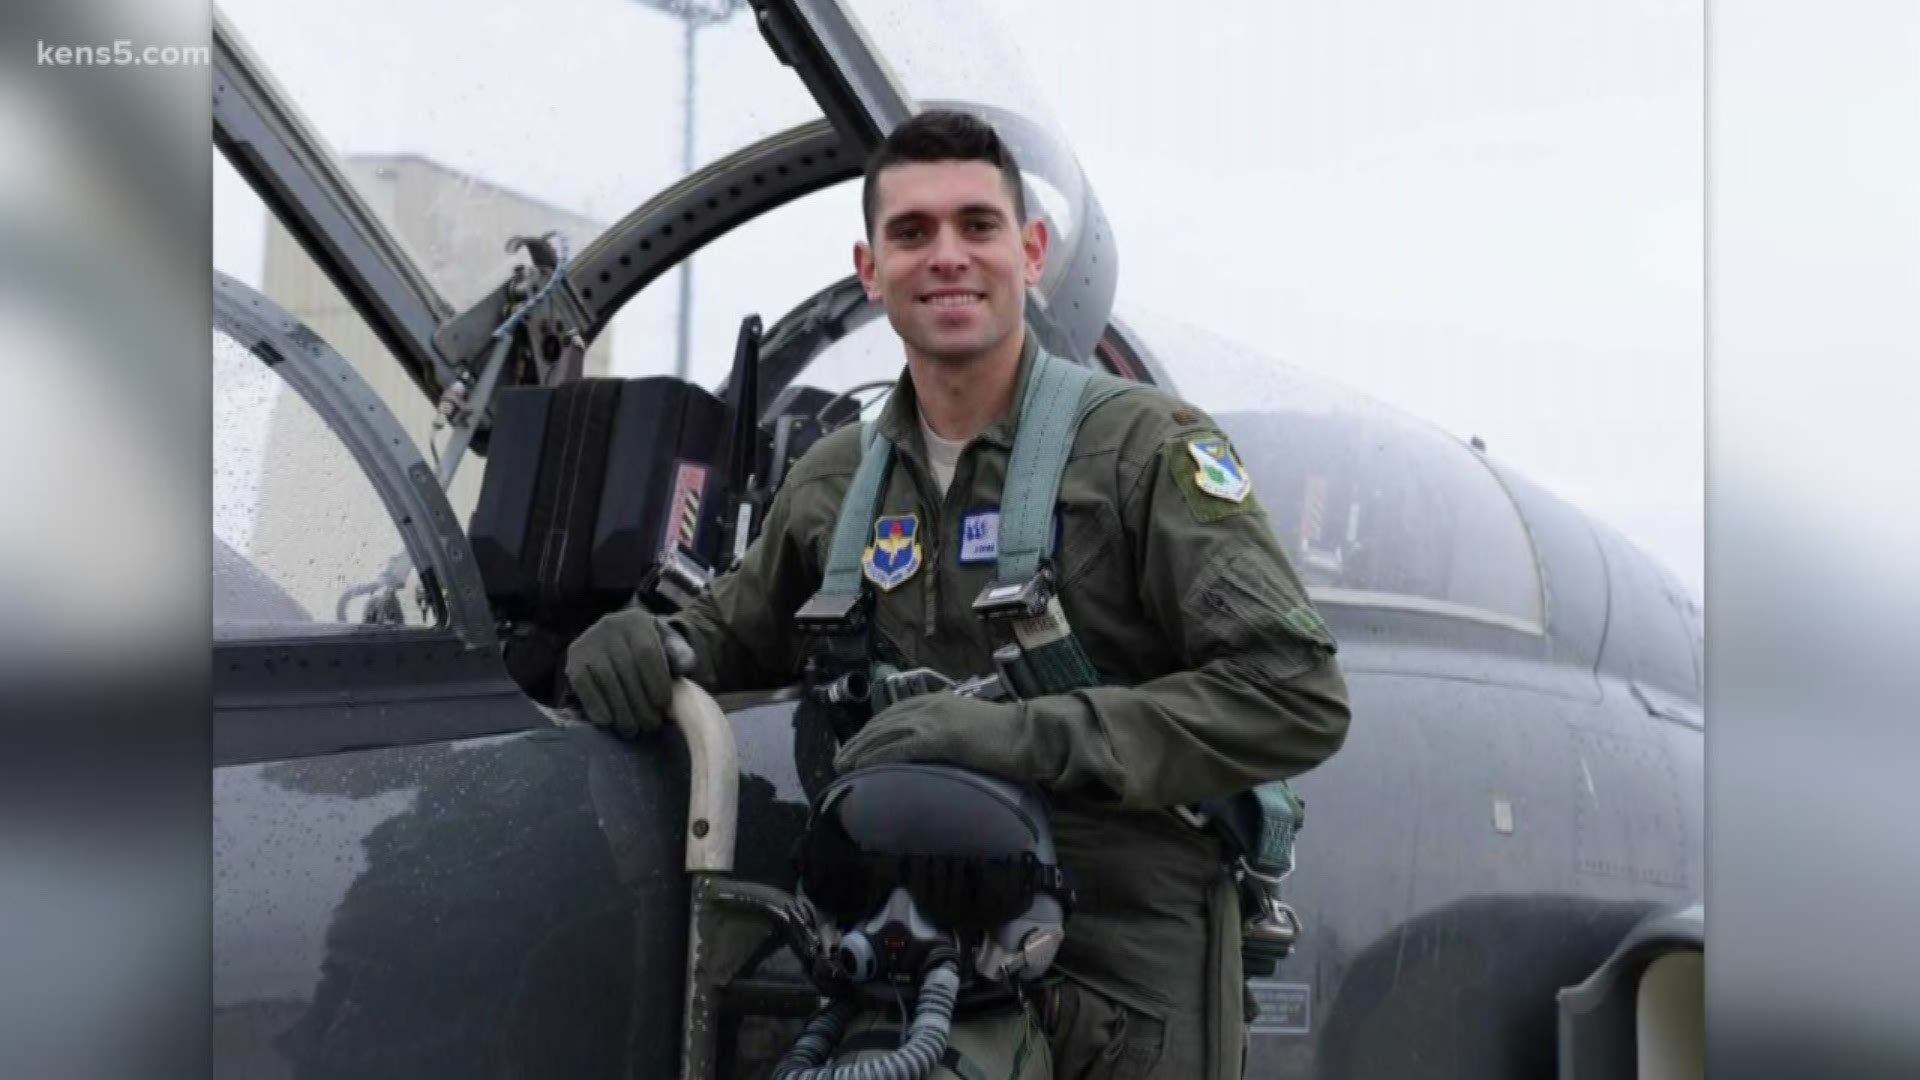 The deceased, Capt. John F. Graziano, 28, was an instructor pilot with the 87th Flying Training Squadron at Laughlin AFB, officials said.